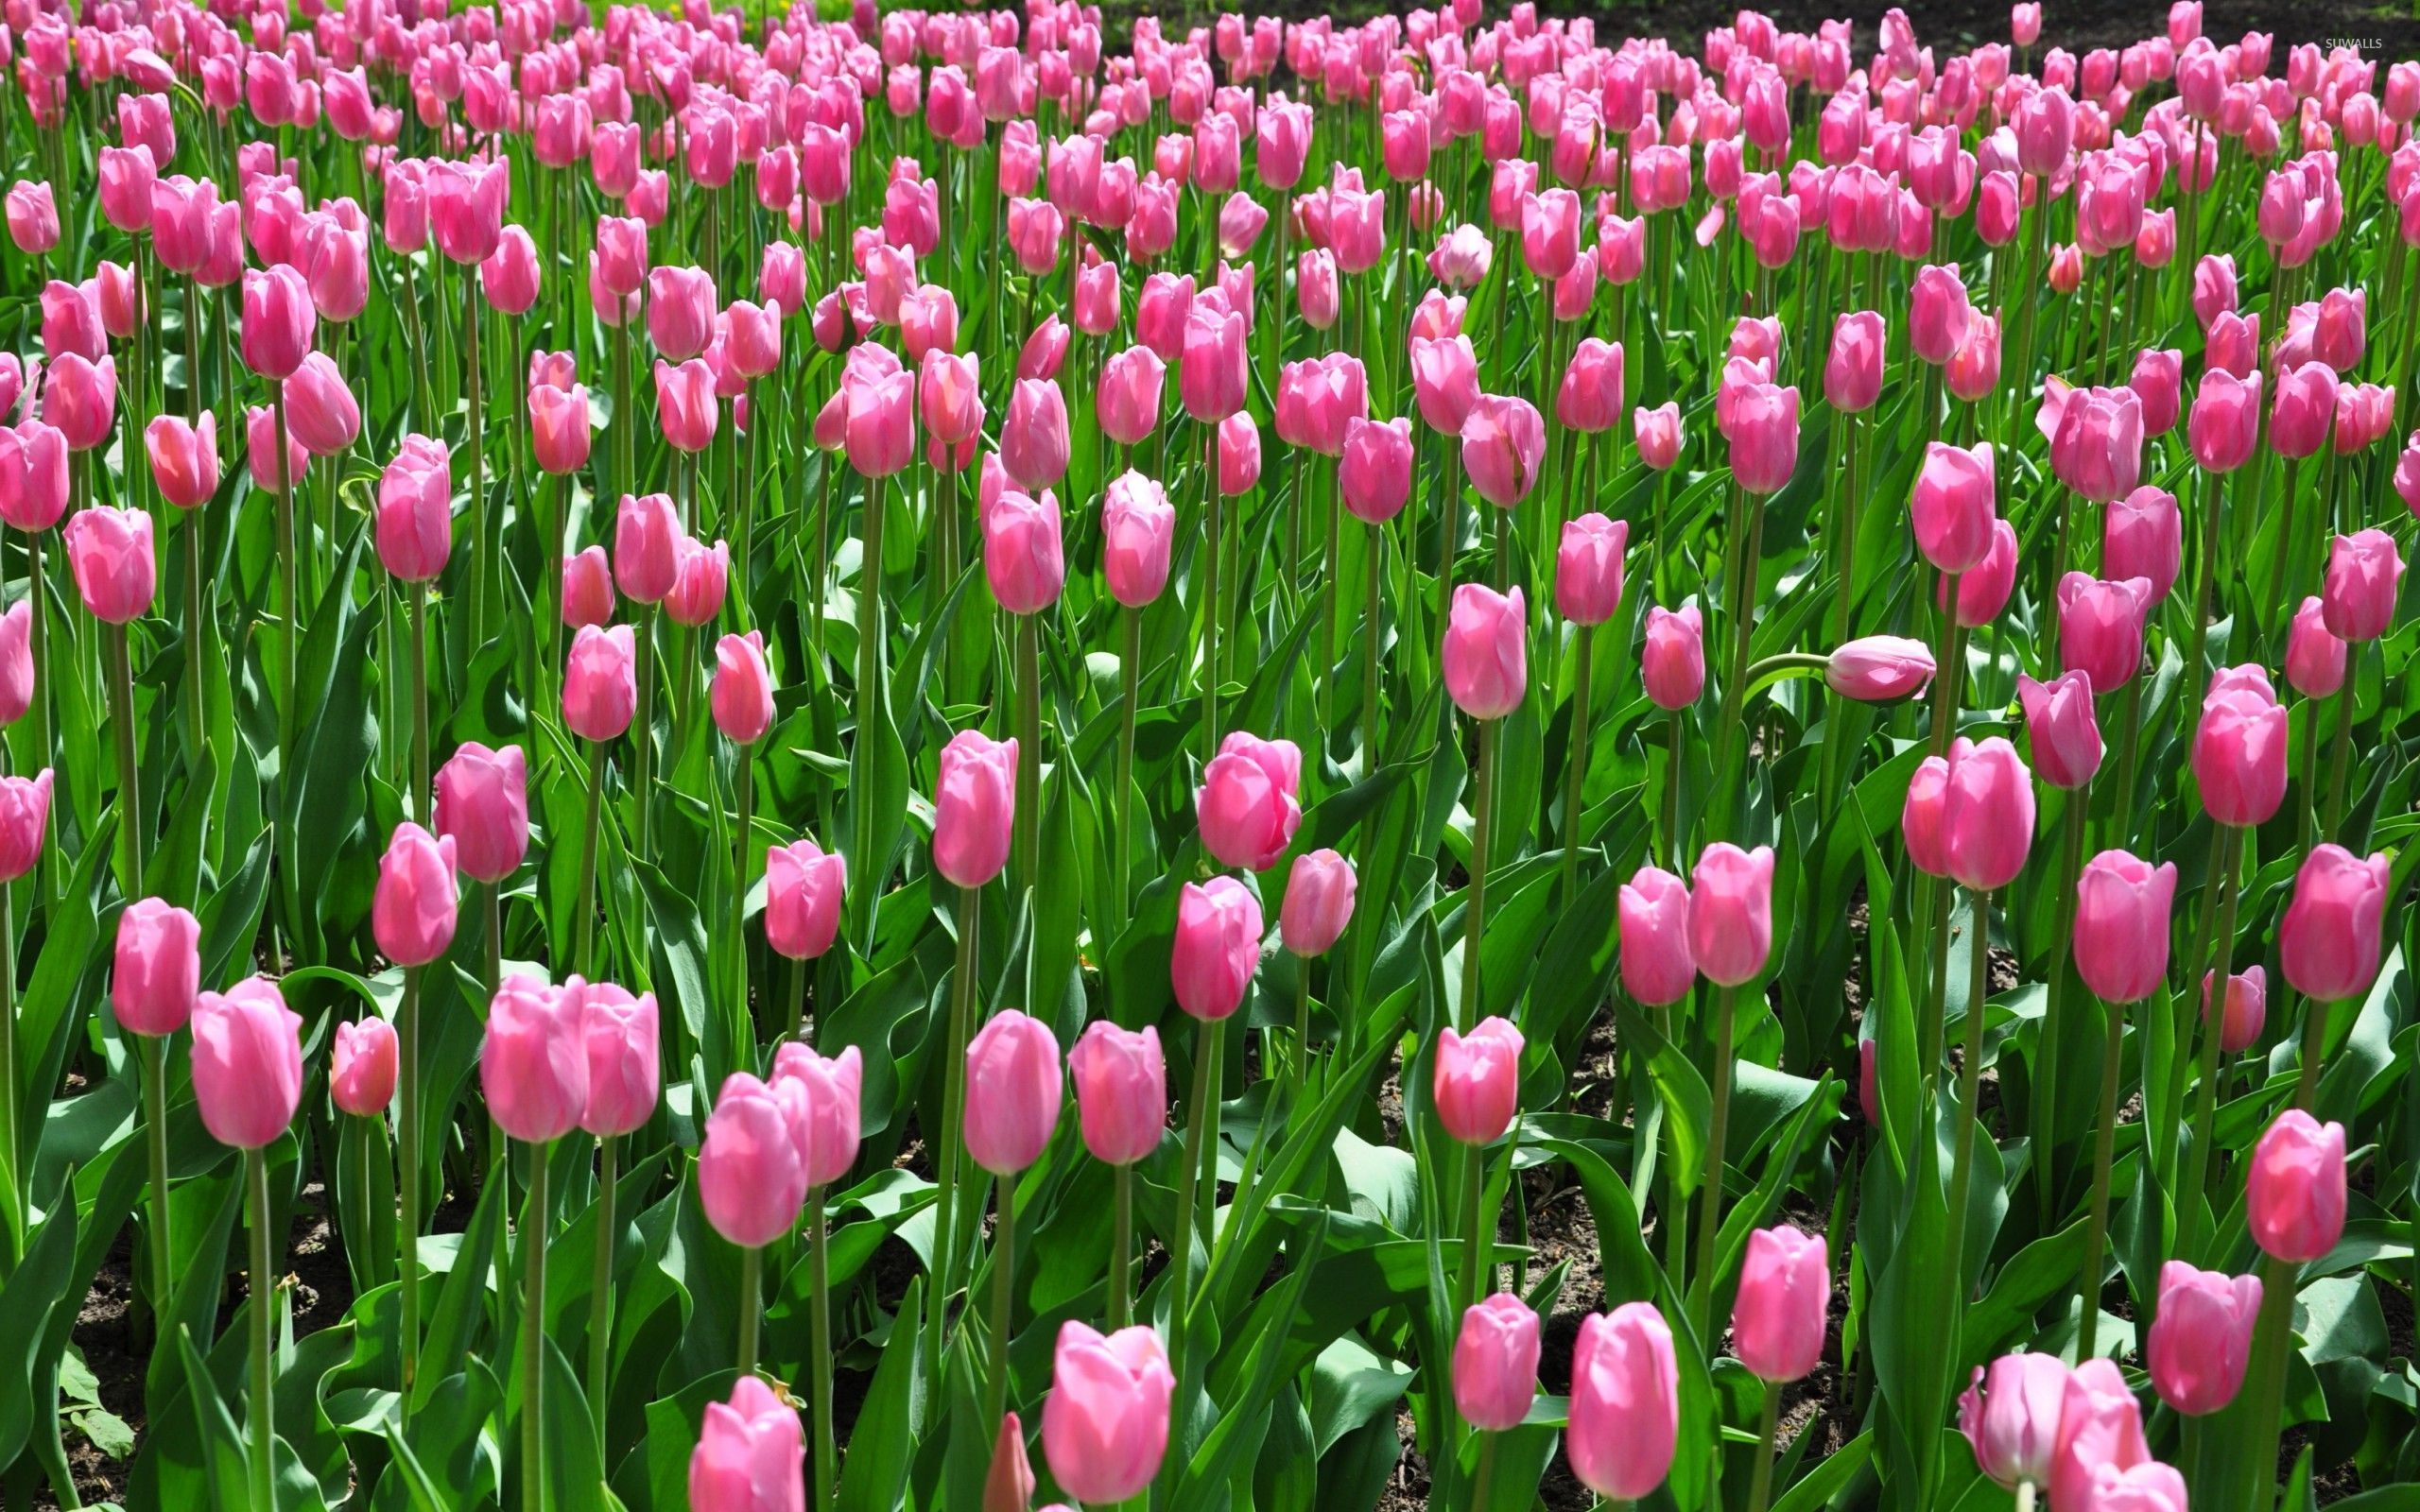 Pink tulips on the field wallpaper - Flower wallpapers - #53203